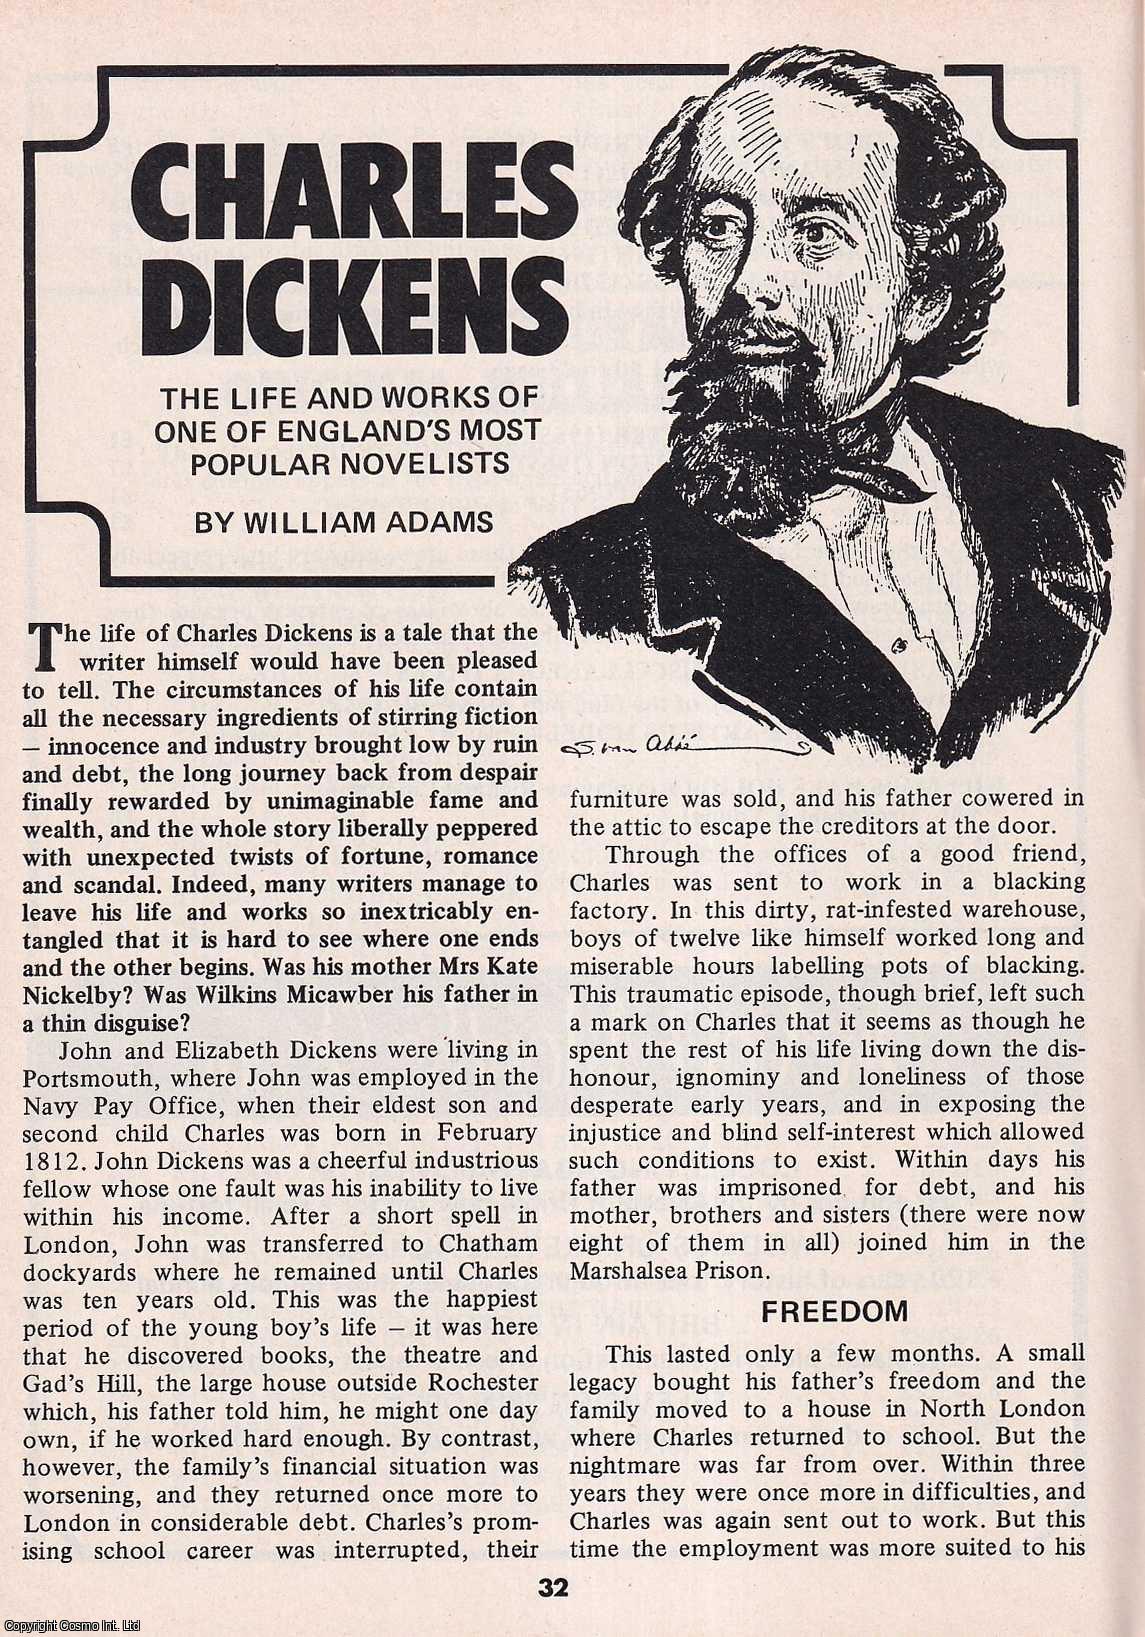 William Adams - Charles Dickens : The Life & Works of One of England's most Popular Novelists. This is an original article separated from an issue of The Book & Magazine Collector publication.